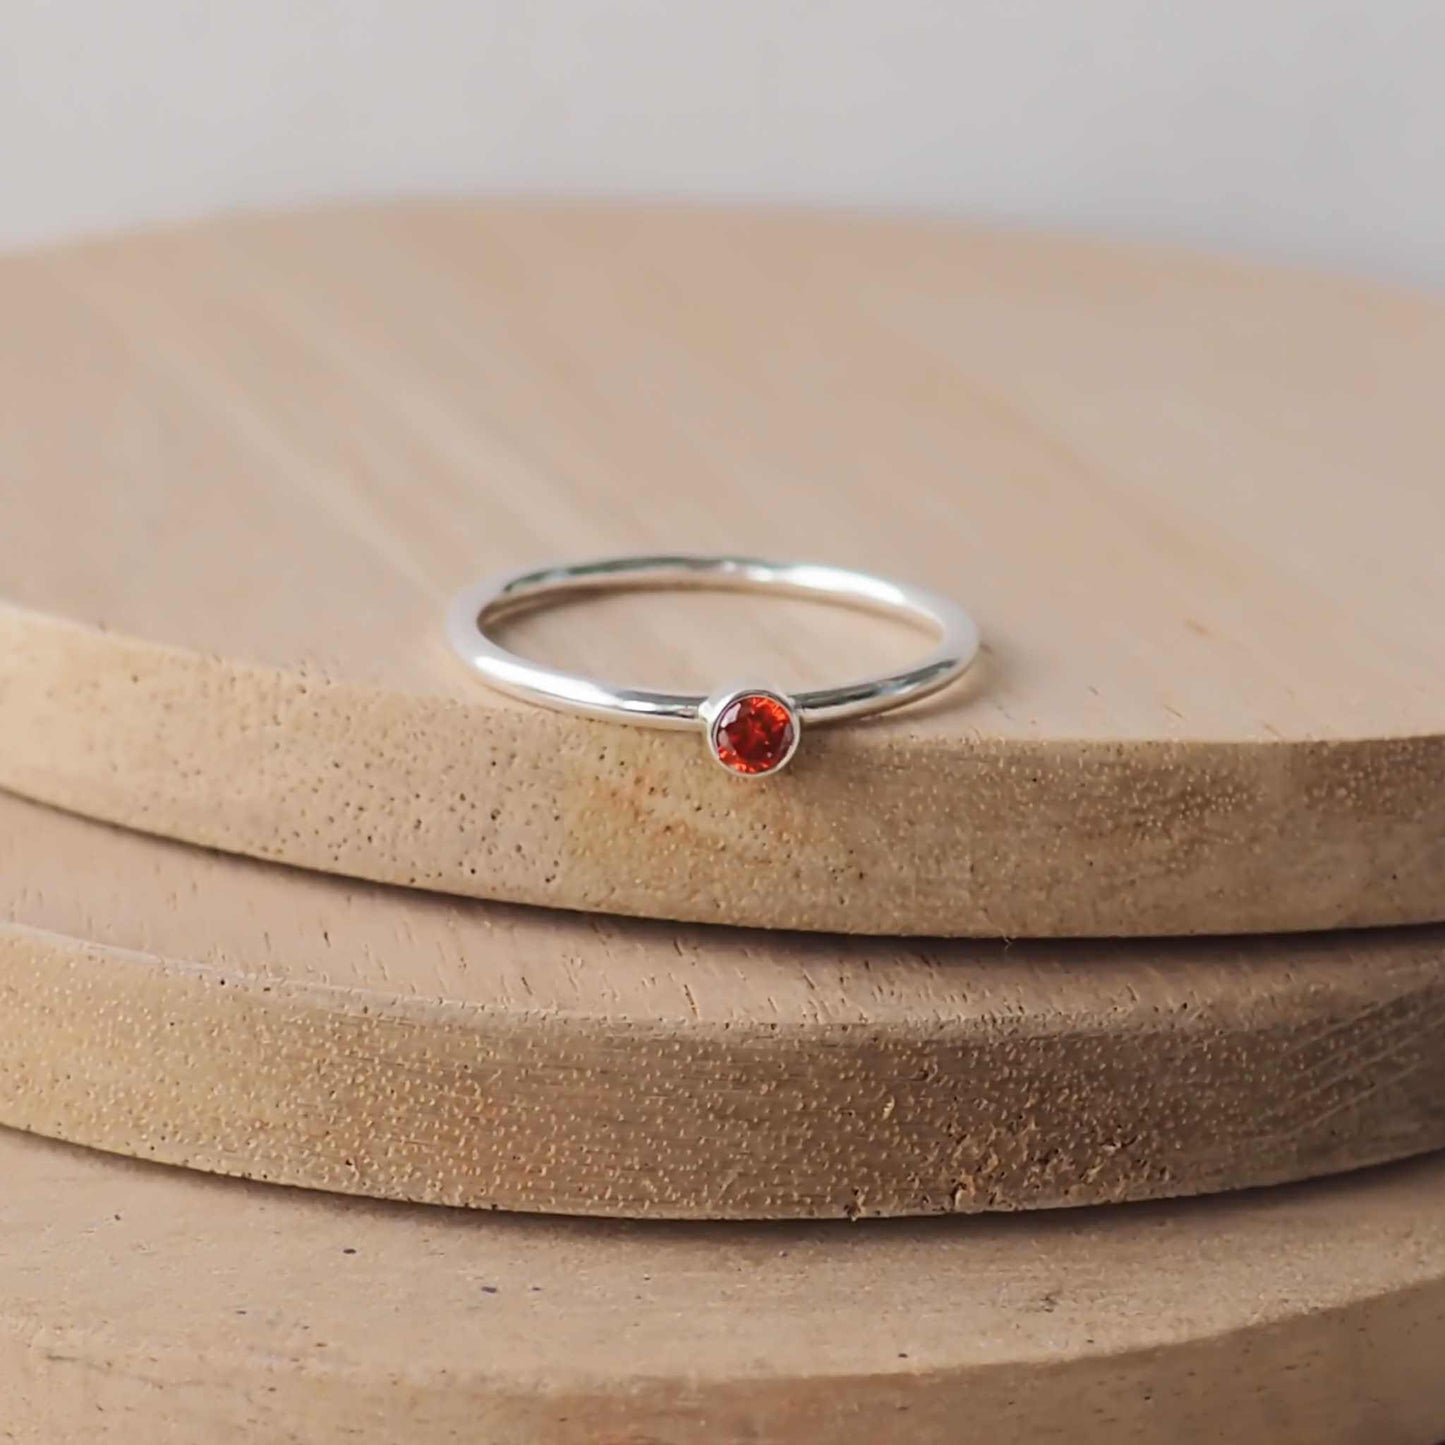 Garnet red solitaire ring in a modern style with a simple round band, The ring is made from Sterling Silver and red Cubic zirconia with a 3mm round gemstone fully enclosed in a silver setting. Handmade by maram jewellery in Edinburgh